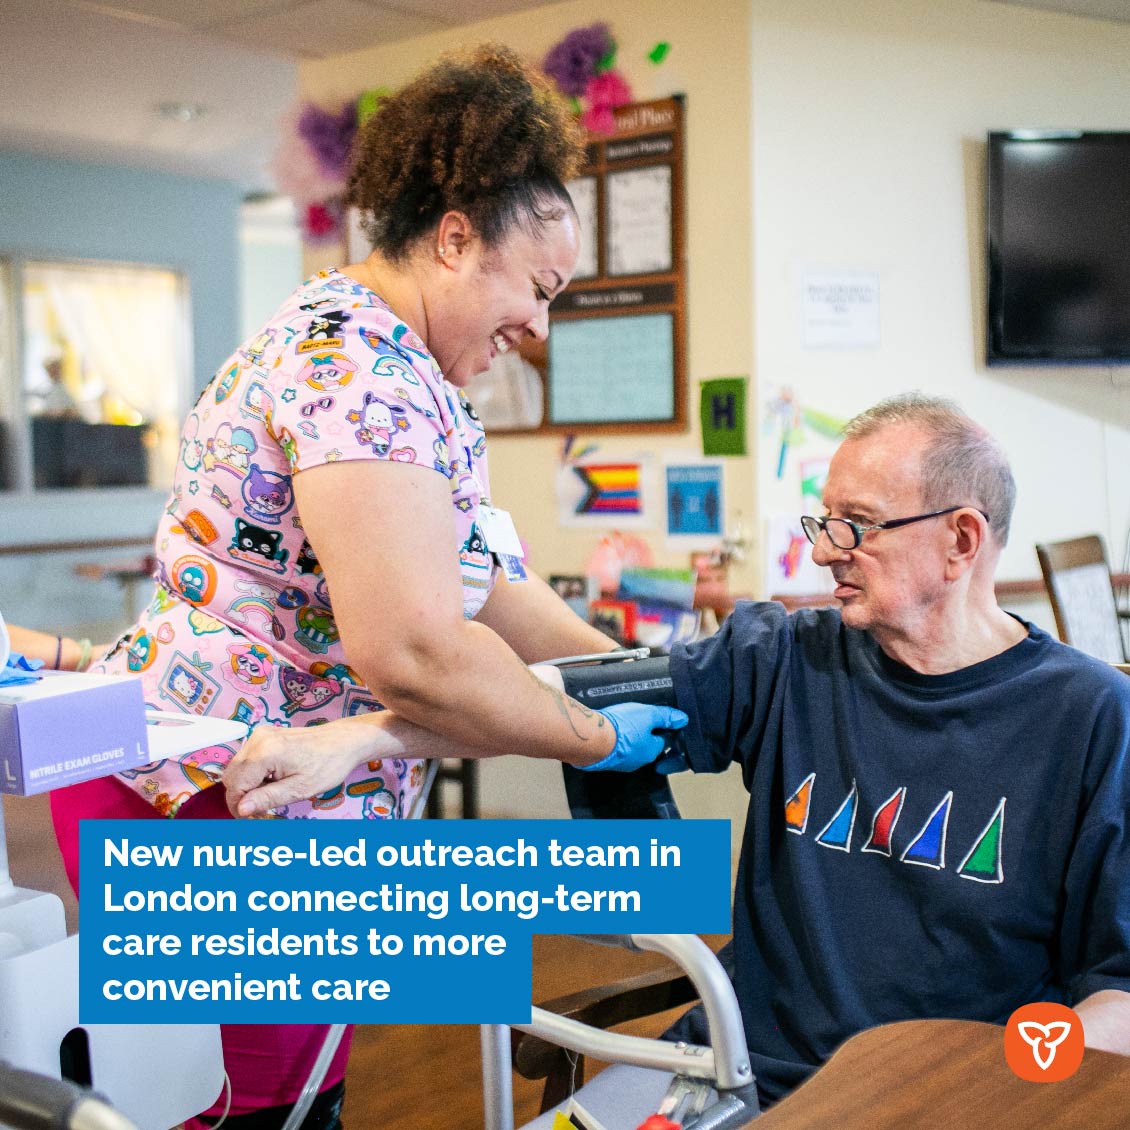 Ontario is helping long-term care residents avoid trips to the hospital by creating and expanding nurse-led outreach teams, including a team in London that will serve 24 long-term care homes. news.ontario.ca/en/release/100…